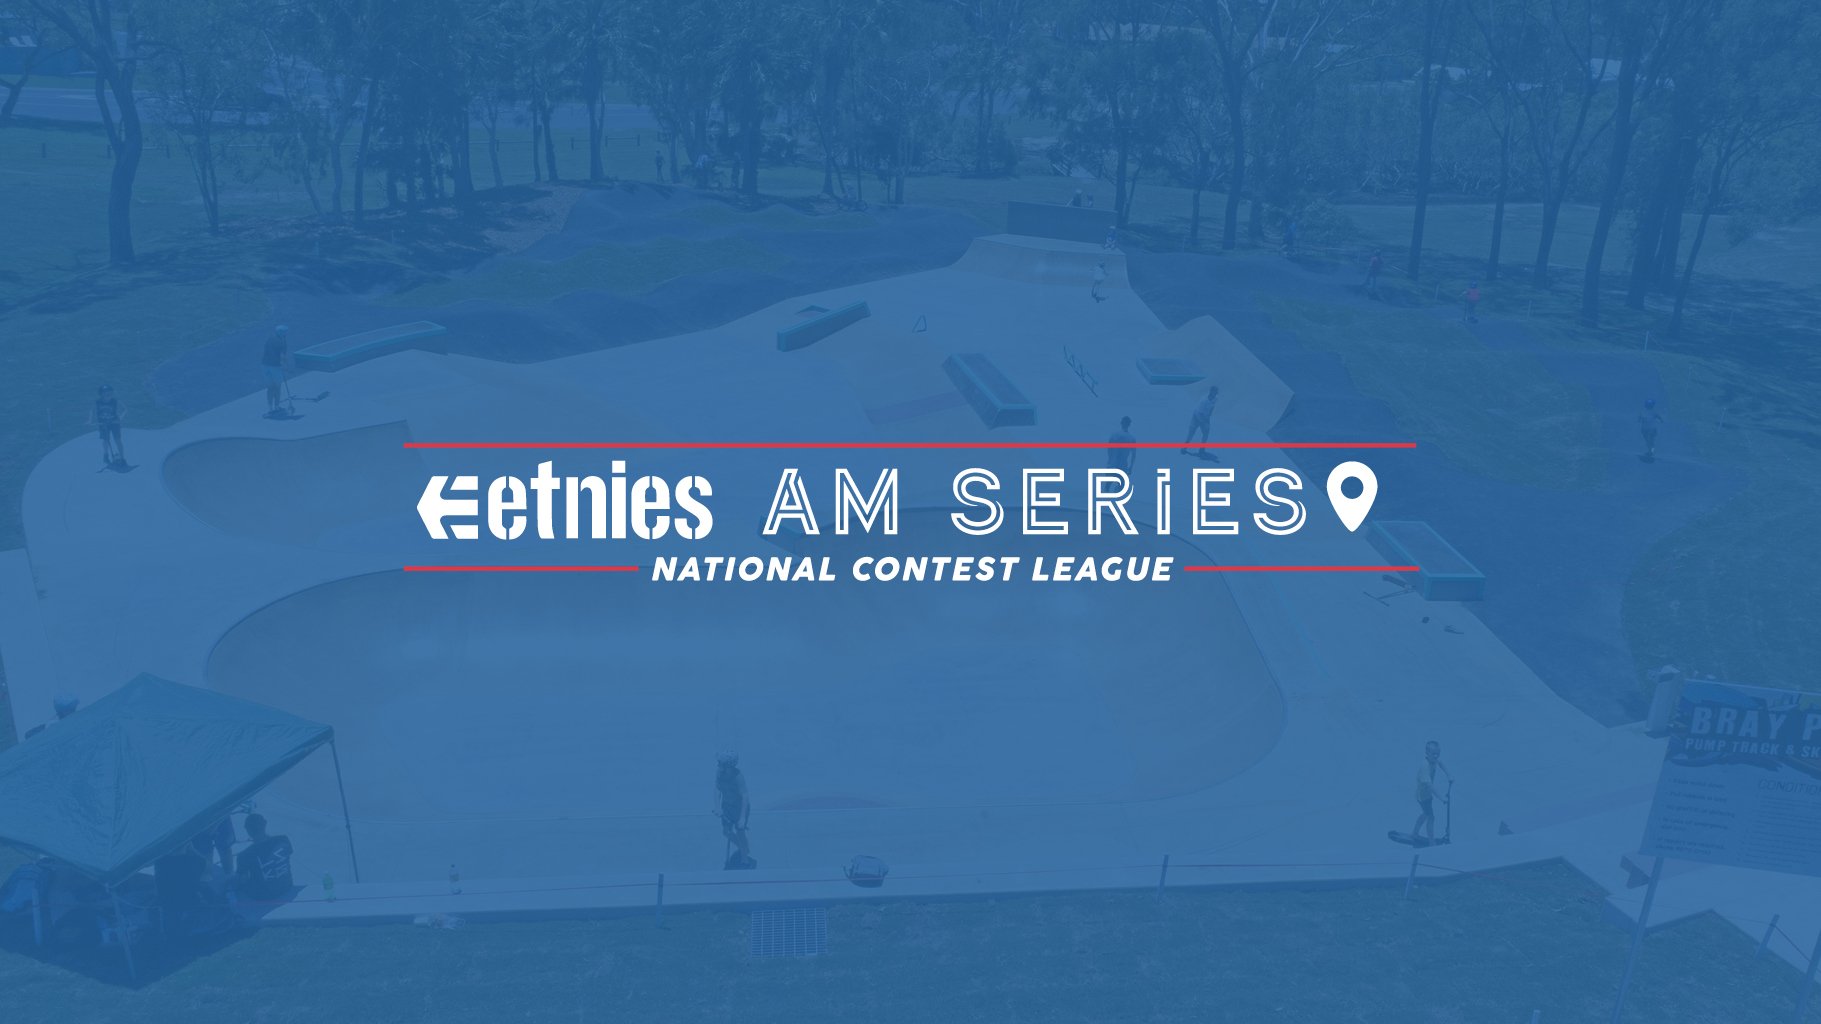 Etnies Am Series Poject Images3.jpg